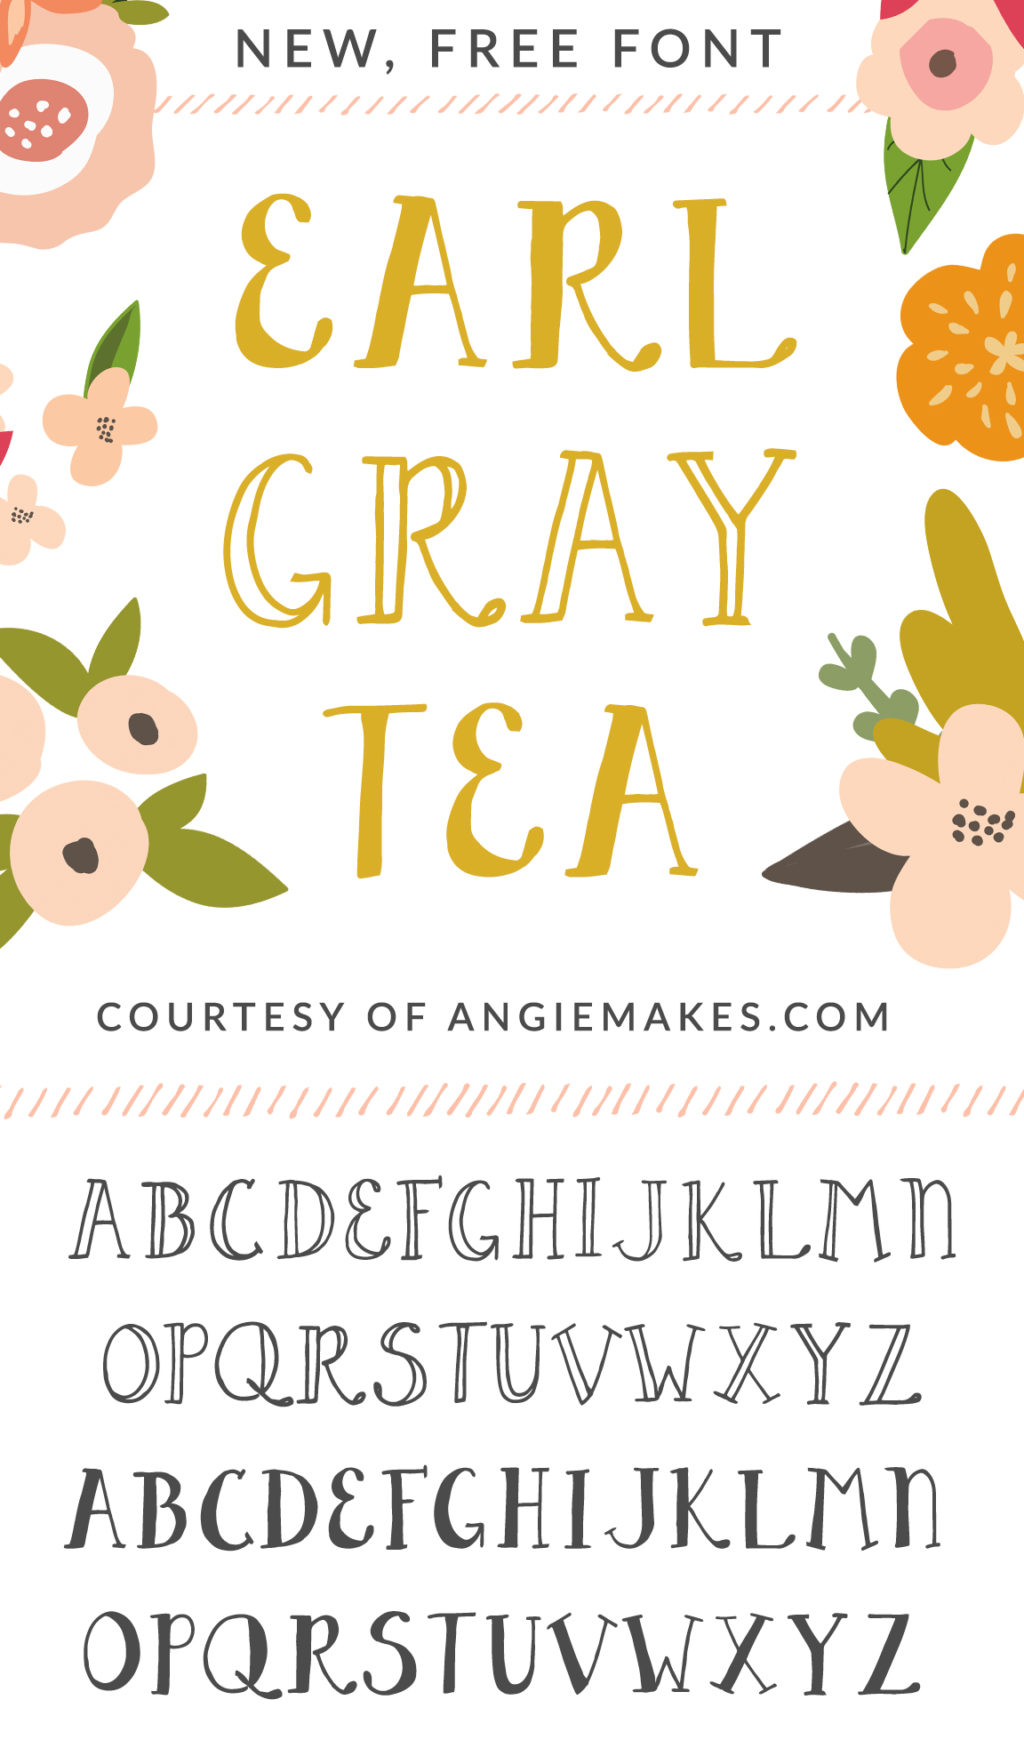 Free Font by Angie Makes... Earl Gray Tea | angiemakes.com